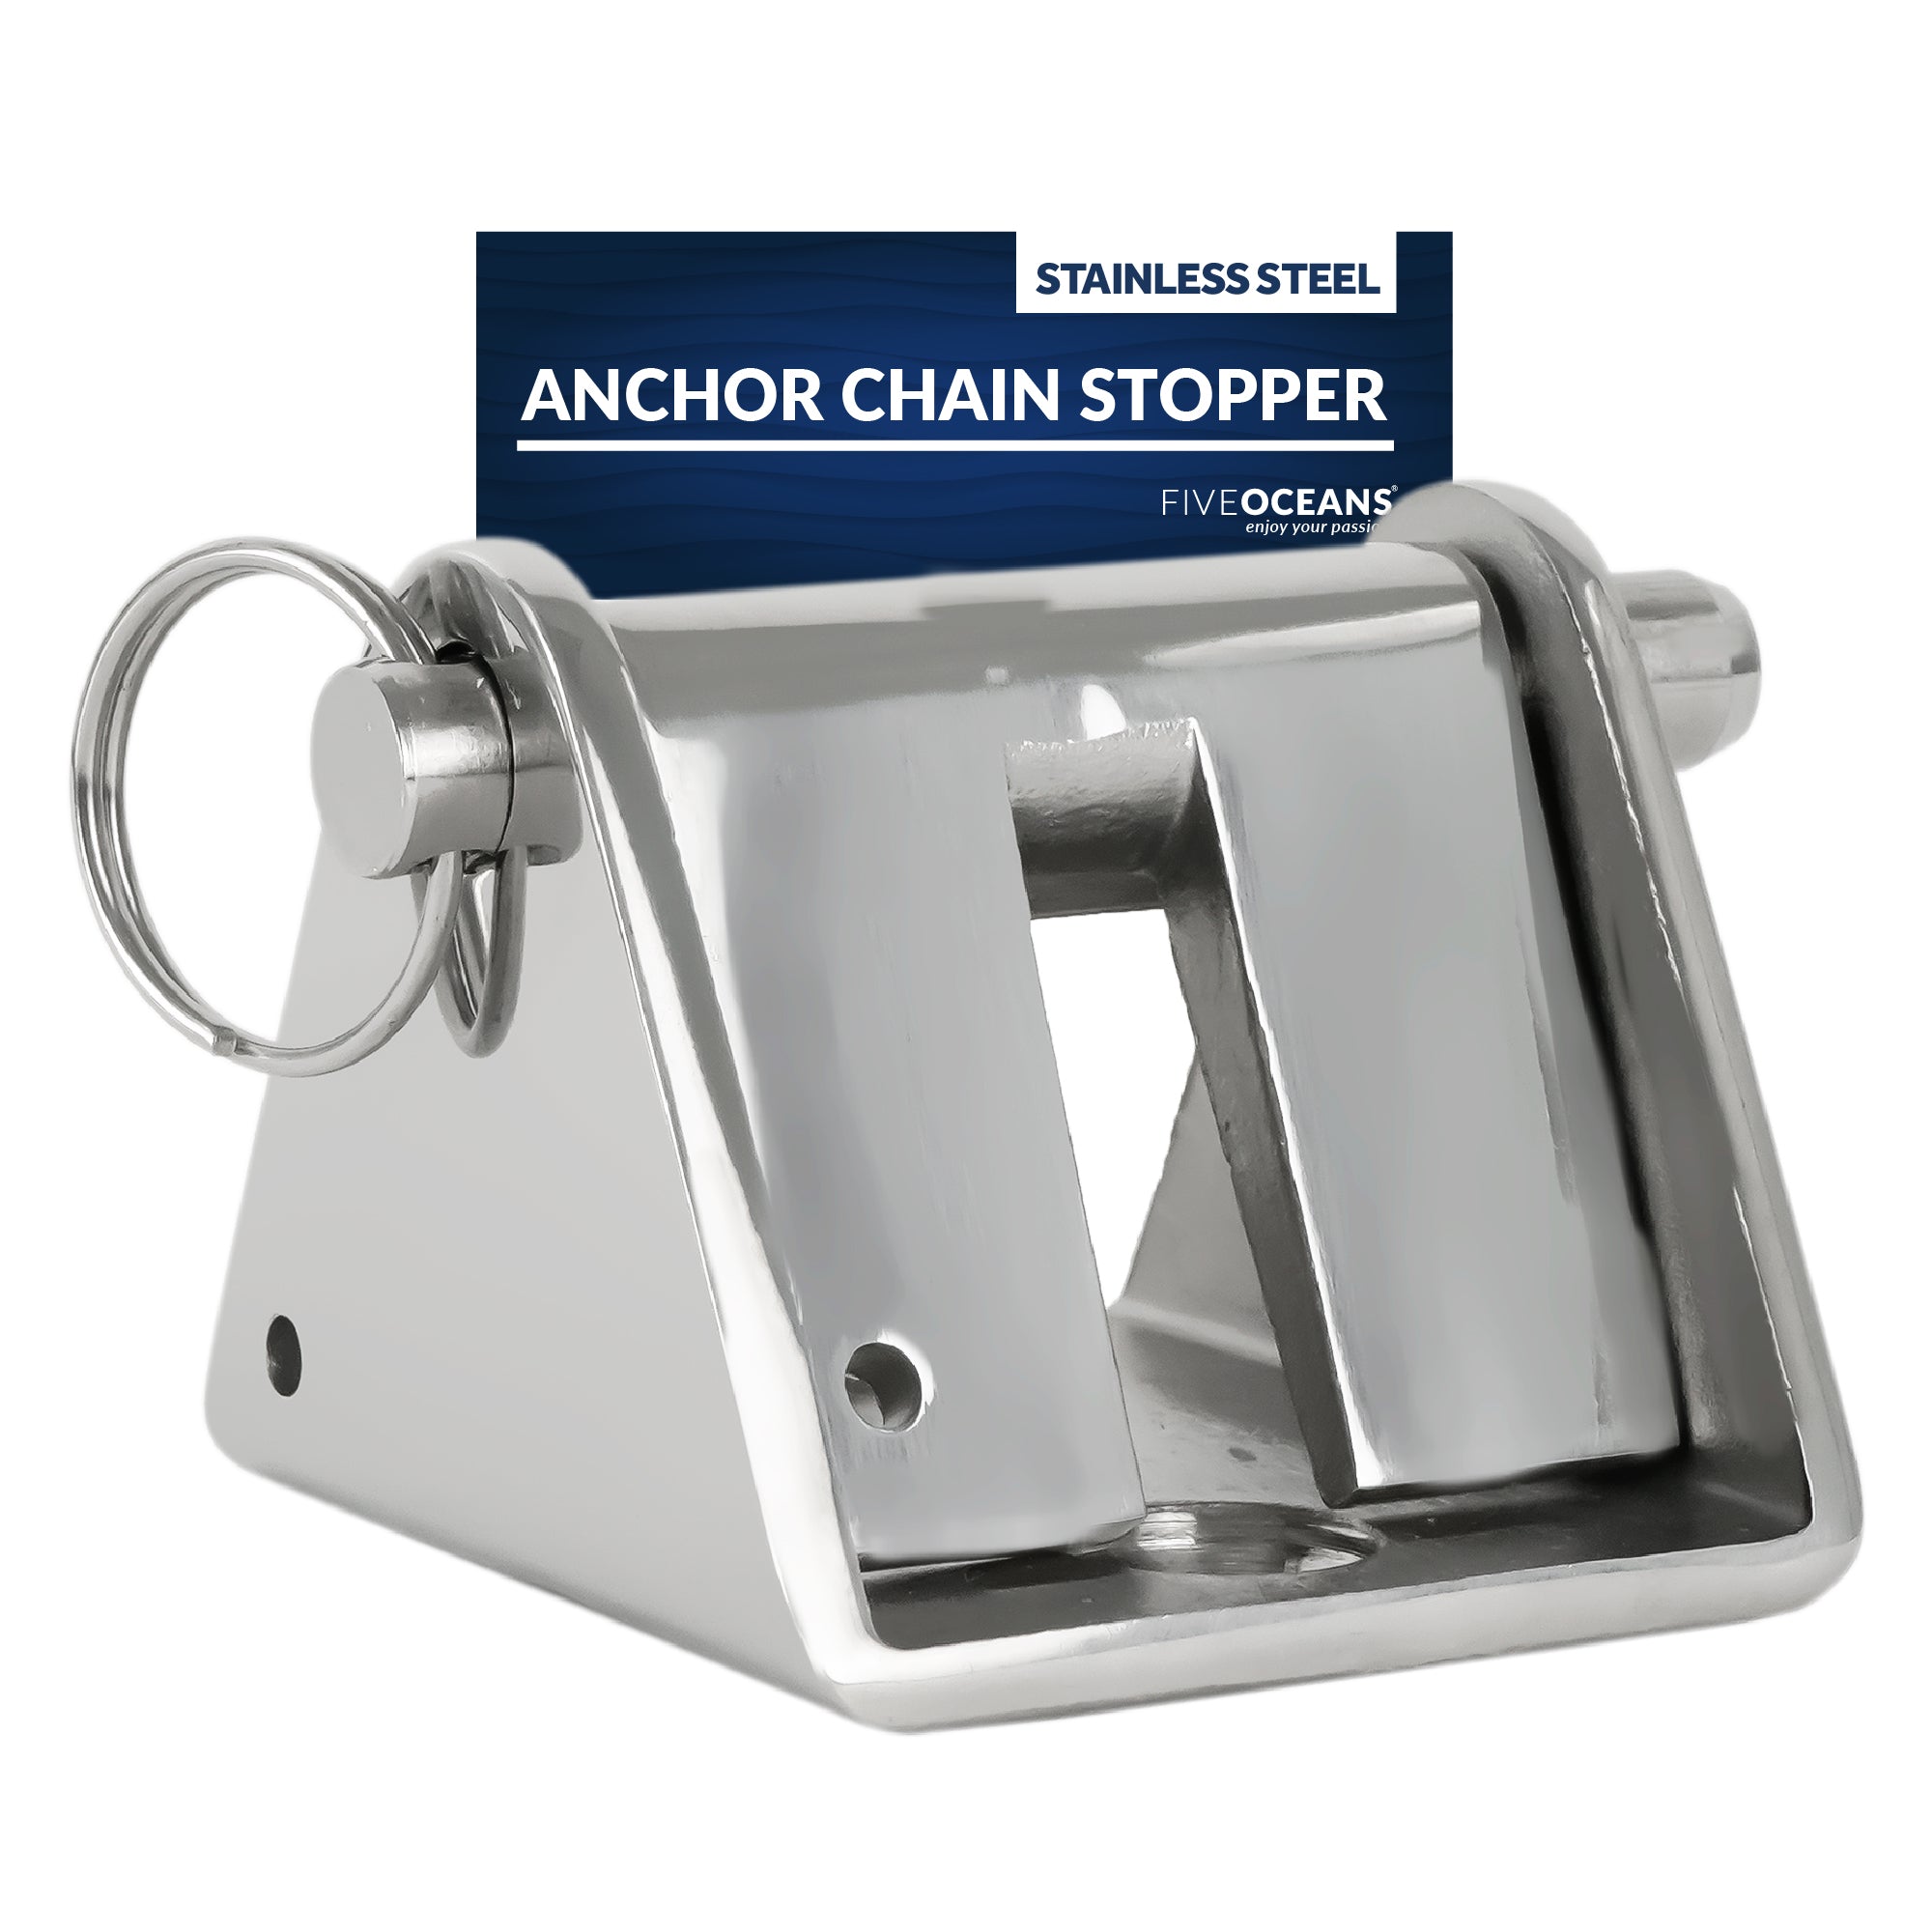 Anchor Chain Stopper for 5/16" to 3/8" Chain, Stainless Steel - FO4506